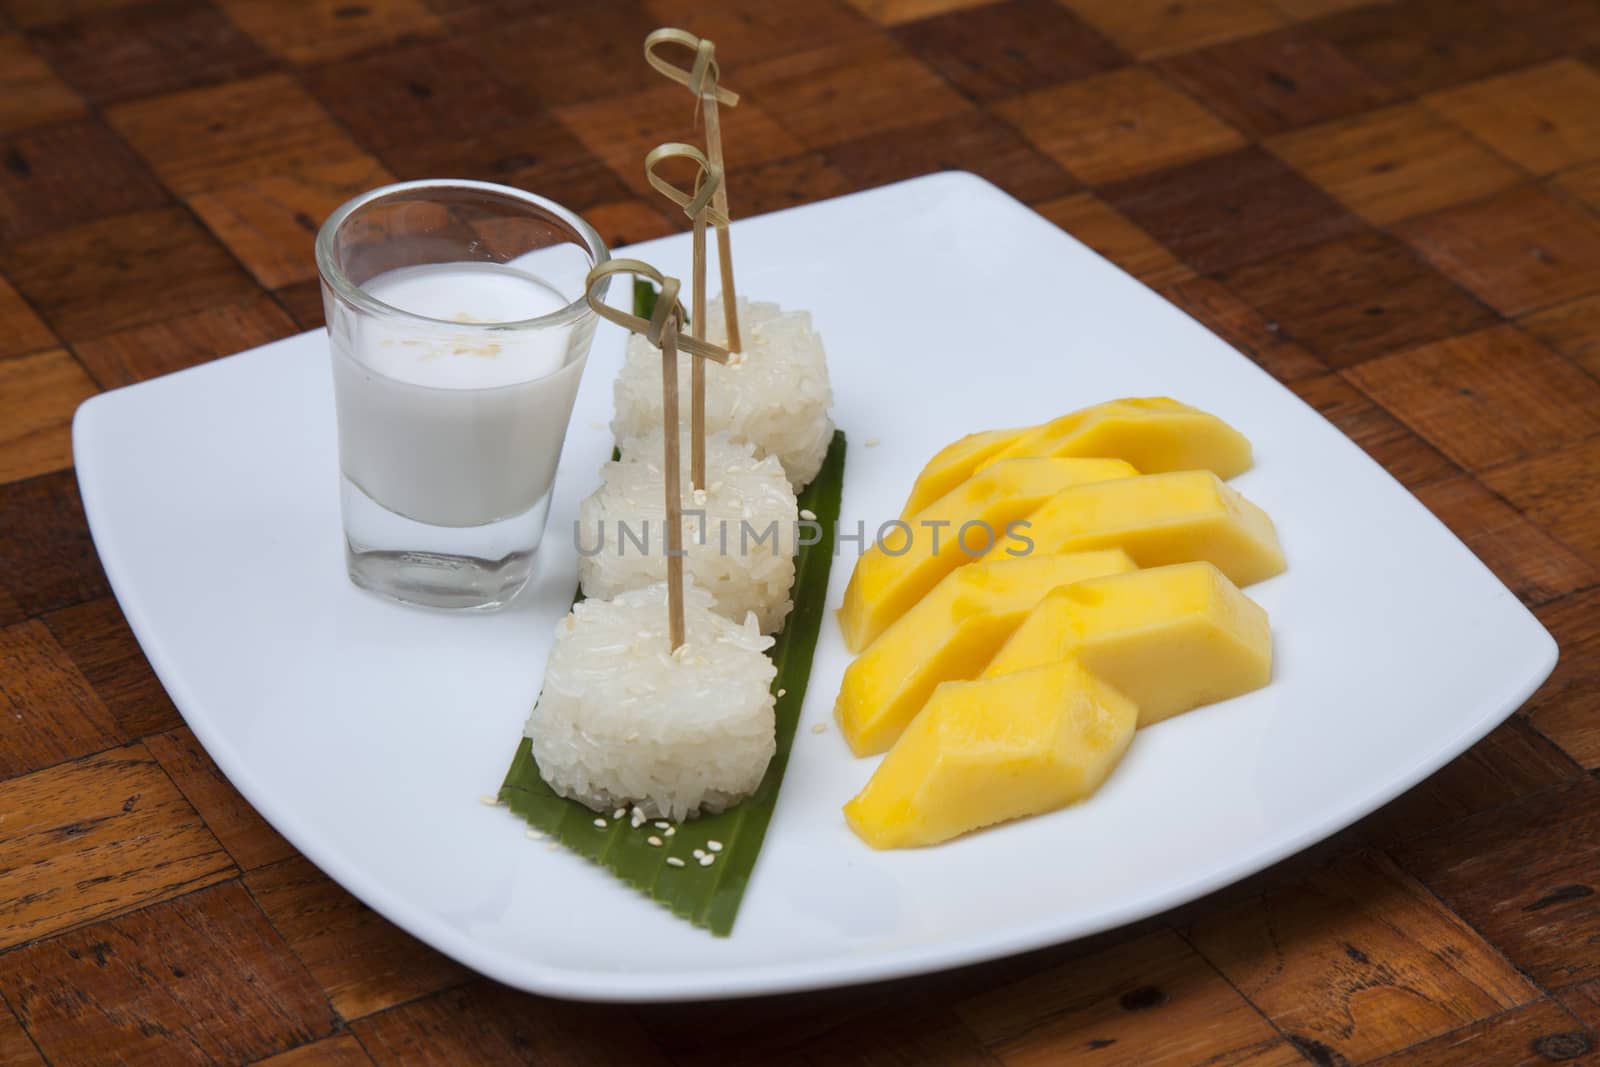 Mango sticky rice topped with beans topped with coconut cream in a dish.